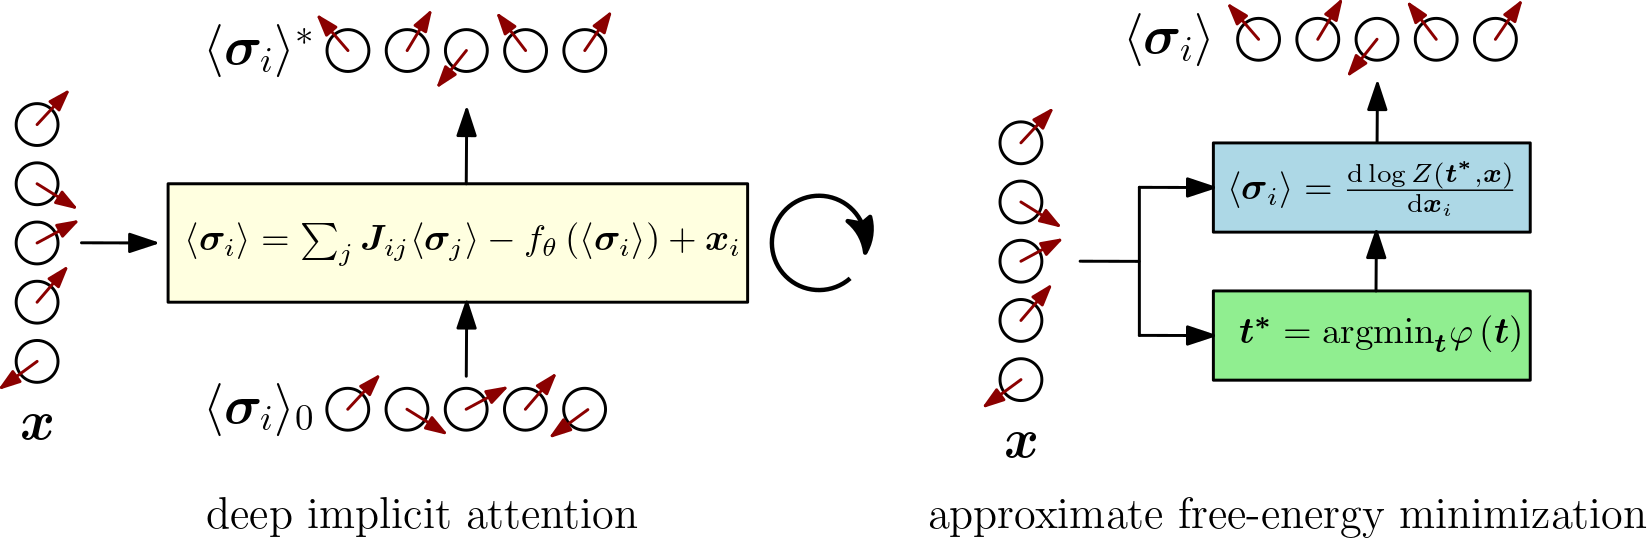 Deep implicit attention and approximate free-energy minimization